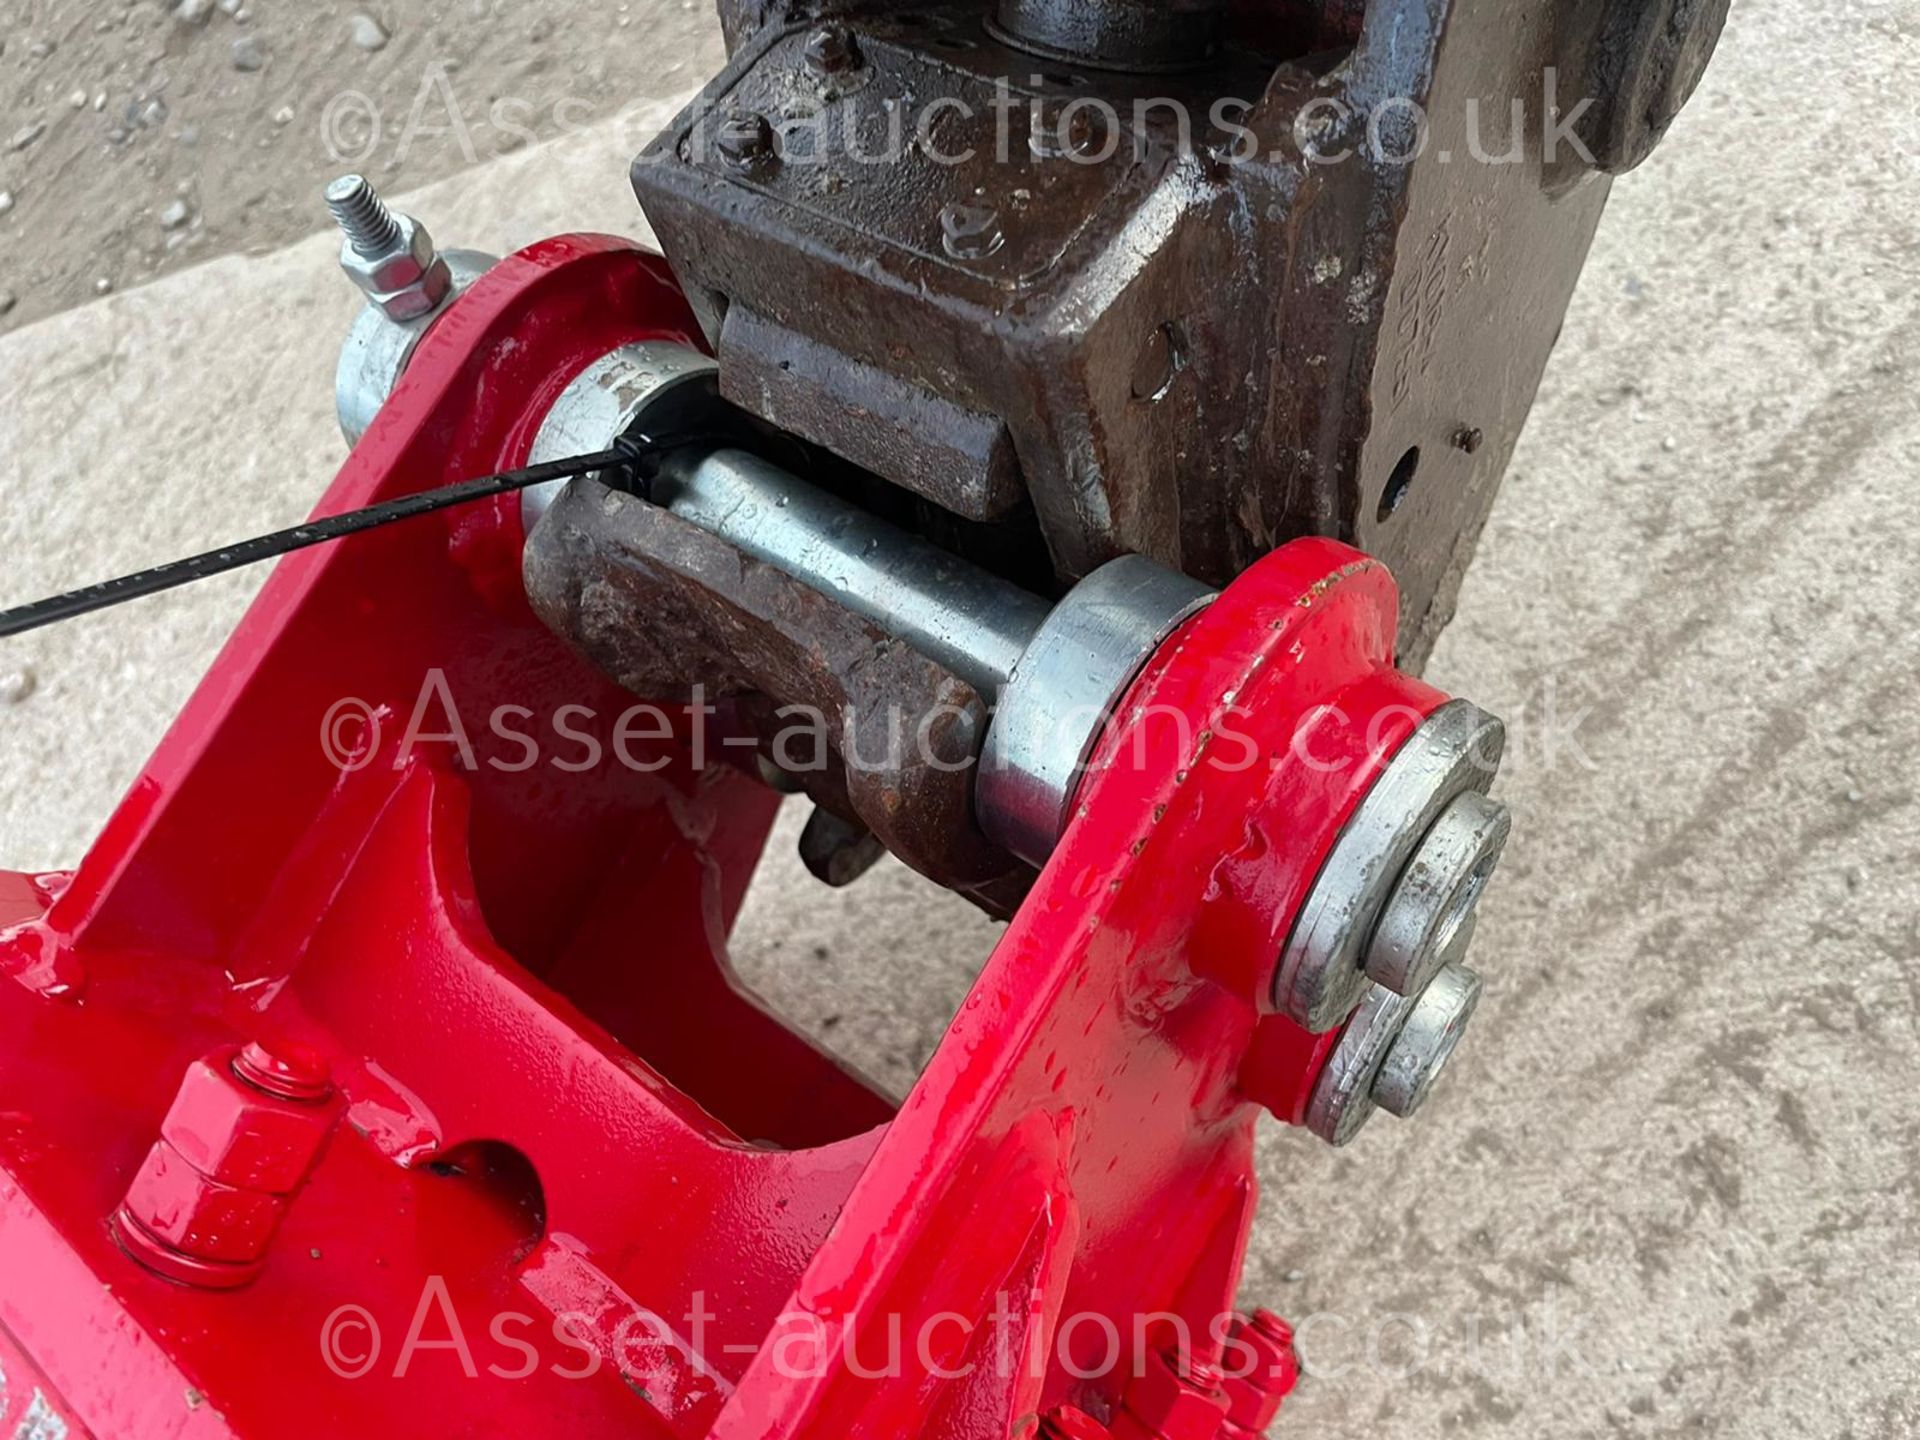 NEW AND UNUSED ES MANUFACTURING ESB00 ROCK BREAKER, CHISEL IS INCLUDED, 30MM PINS *PLUS VAT* - Image 3 of 10